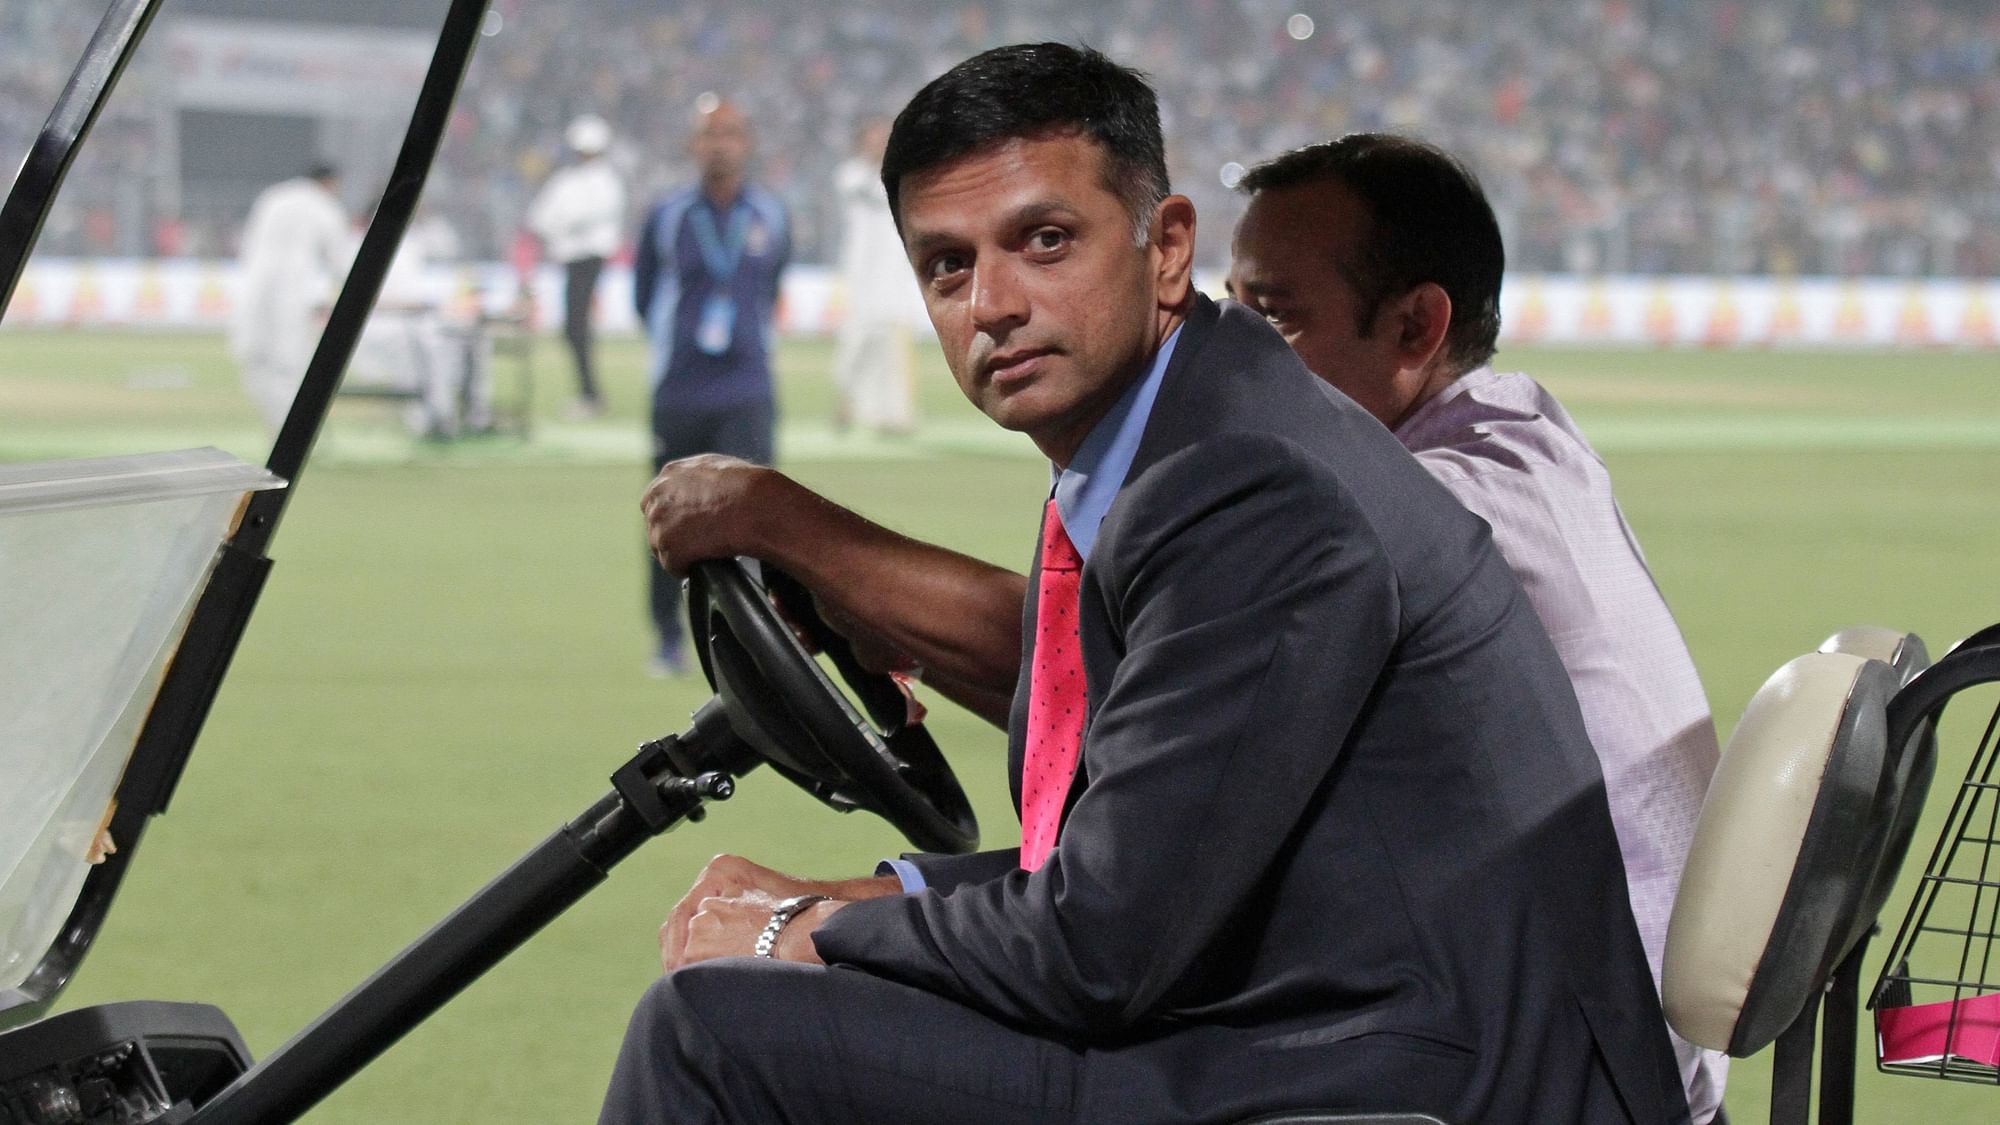 Former India captain and batting great Rahul Dravid feels maintaining good mental health is a “big challenge” in a “tough game” like cricket.